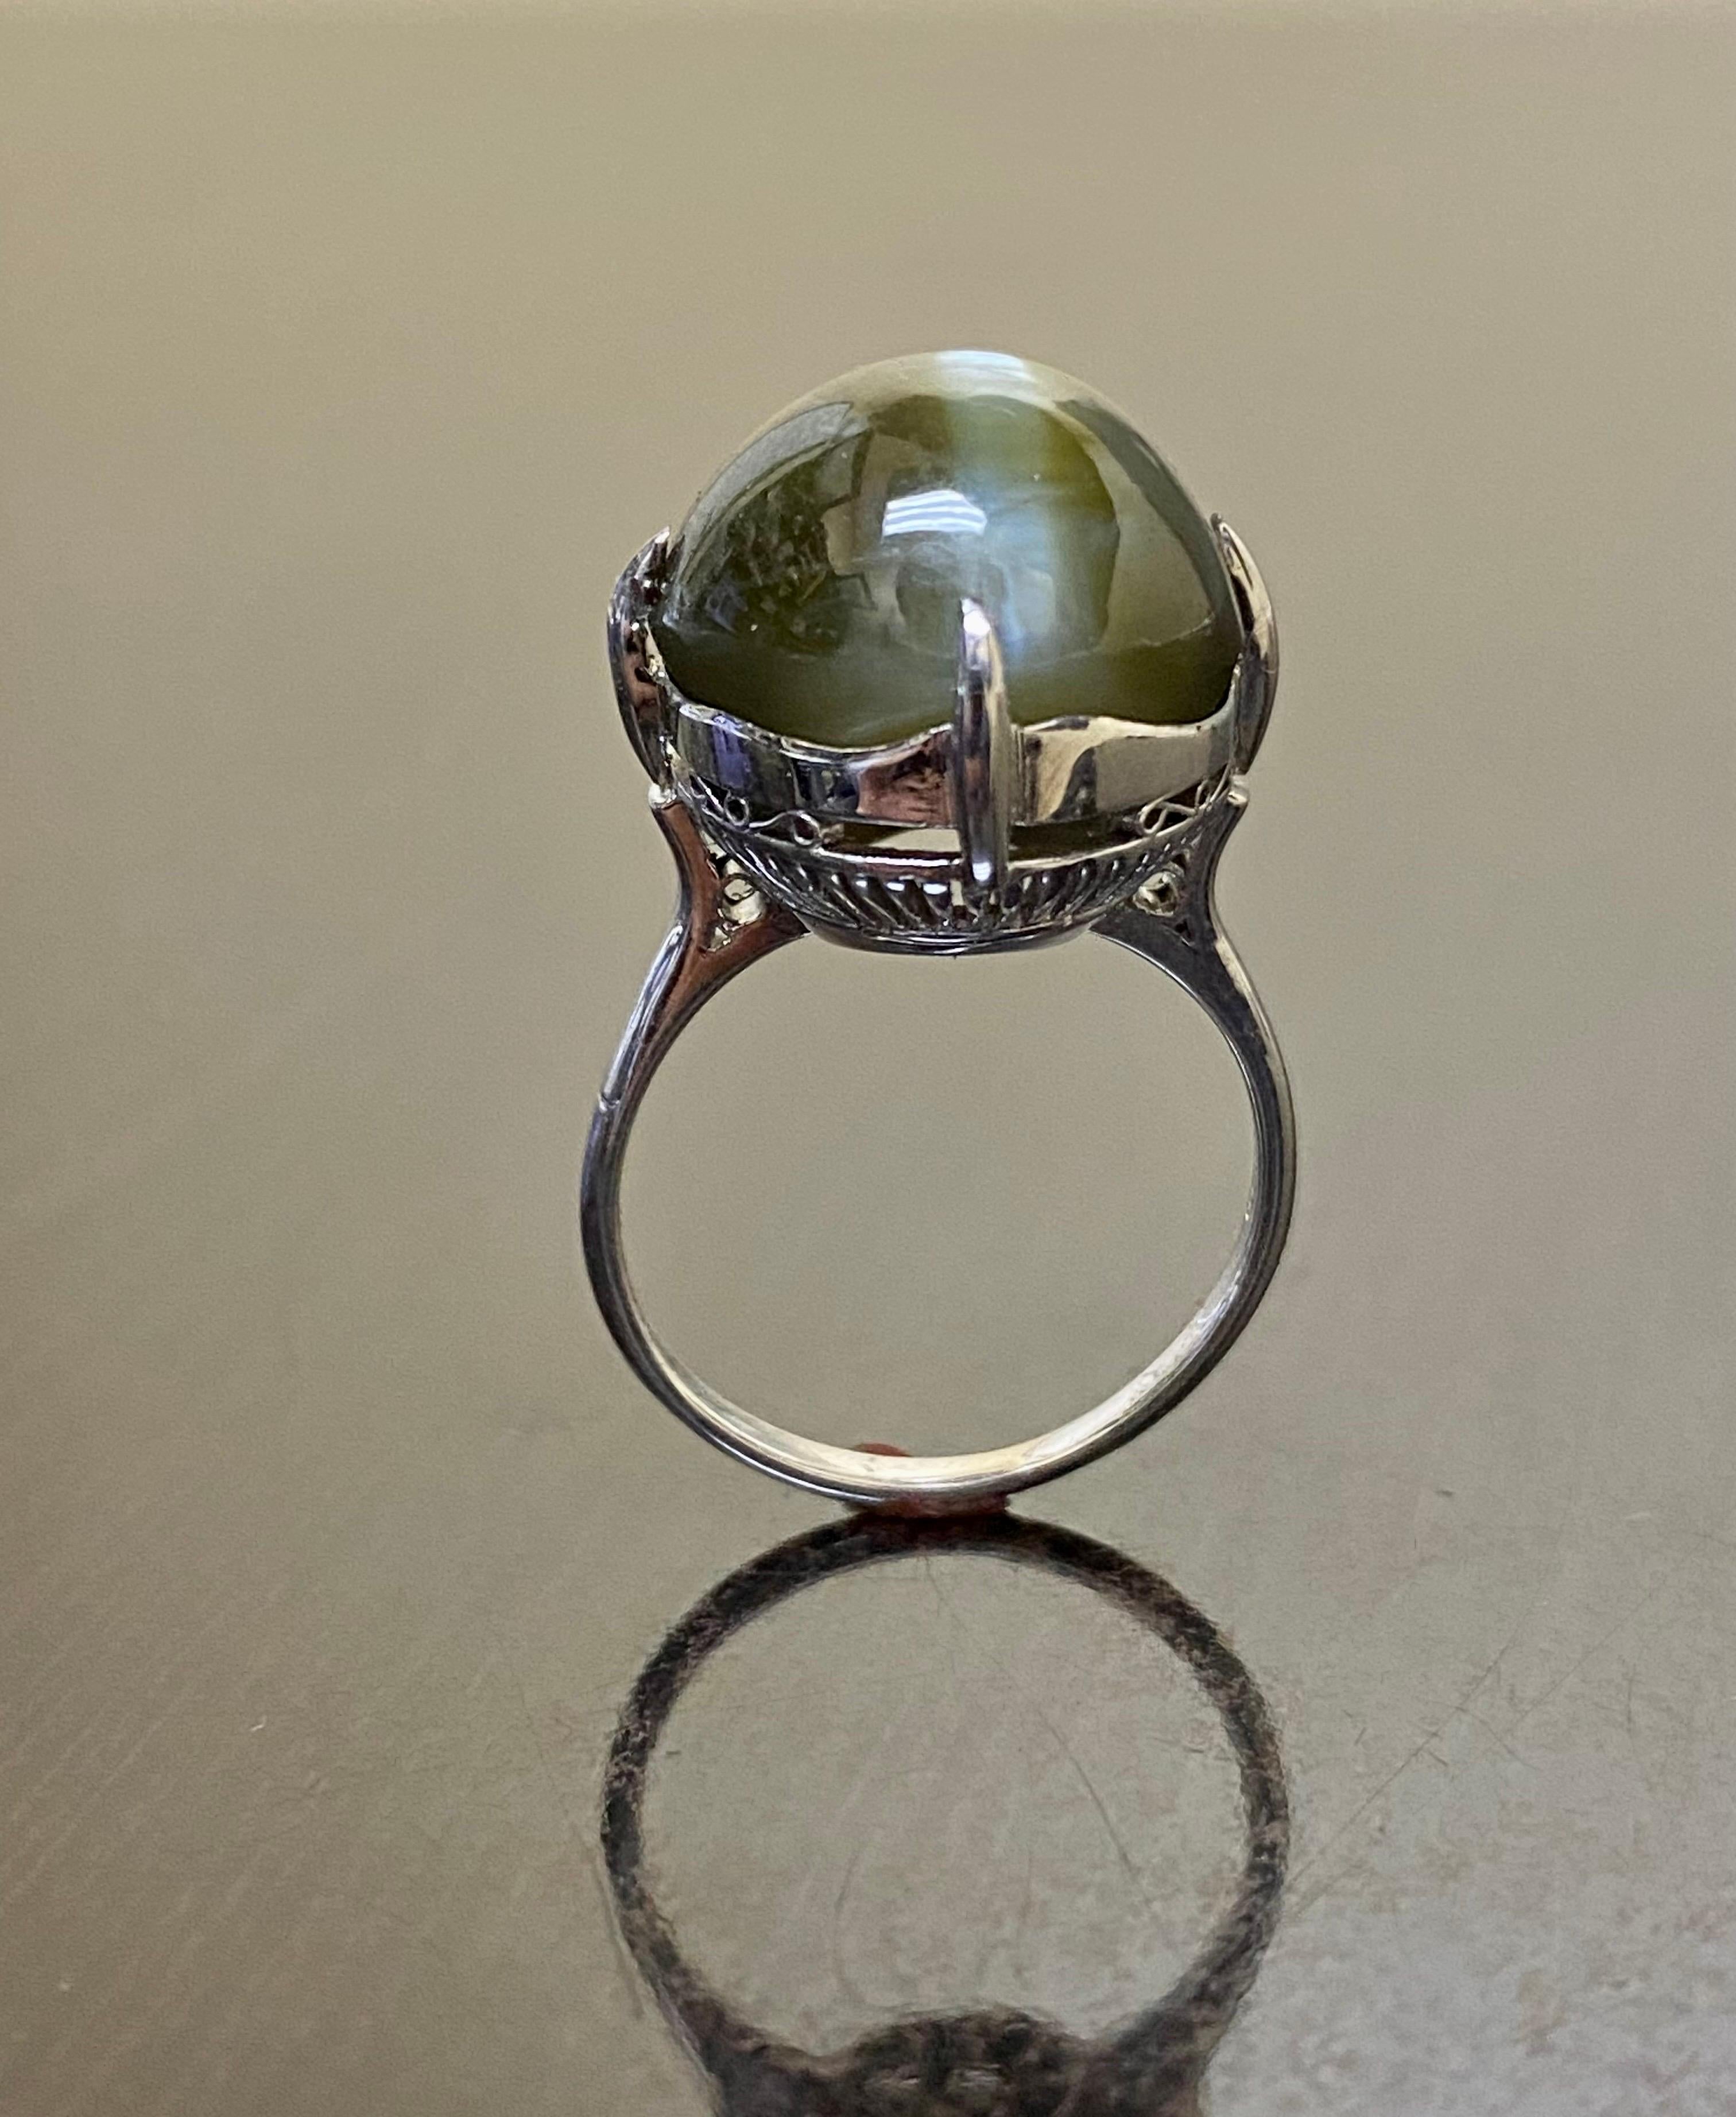 Vintage Handmade 22.71 Carat Cat's Eye Chrysoberyl Platinum Ring In Excellent Condition For Sale In Los Angeles, CA